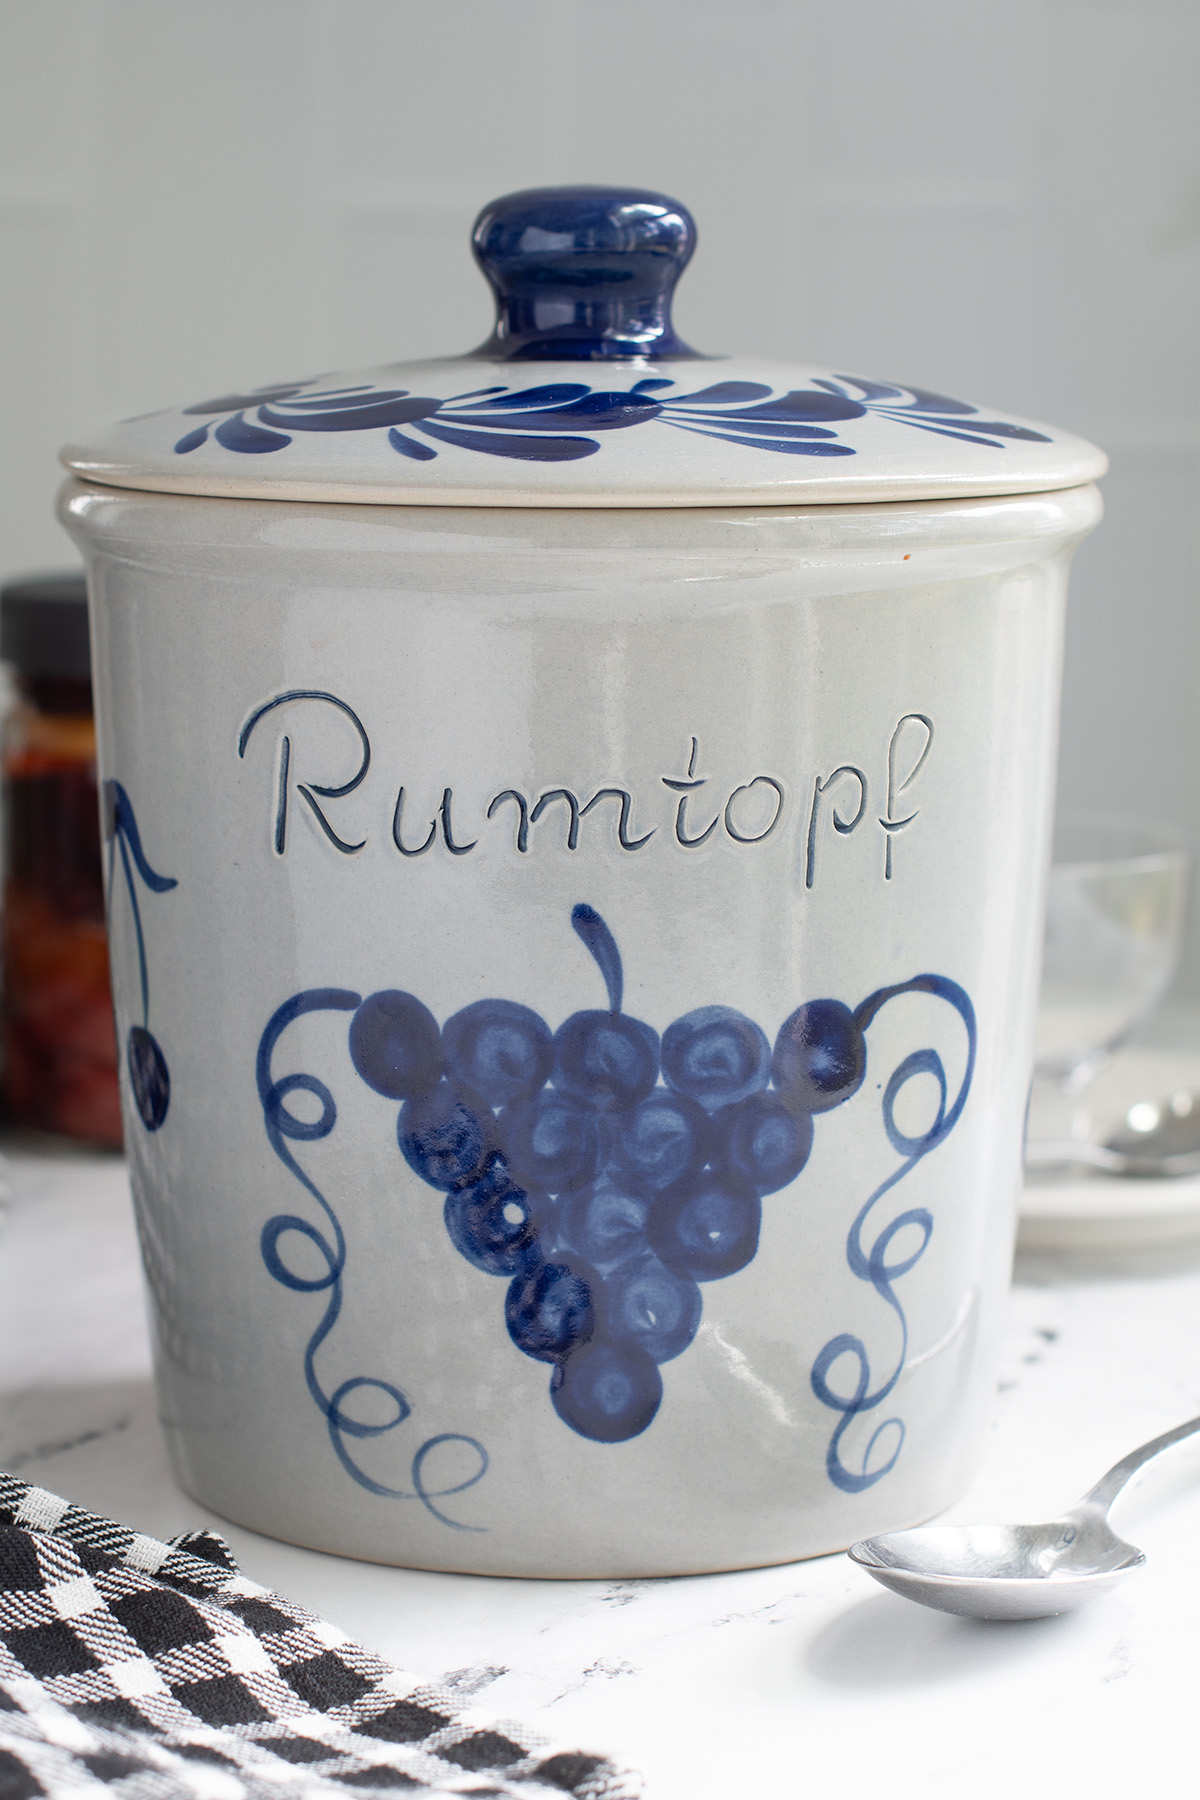 a blue and gray crock with a lid and the word rumtopf on the front.